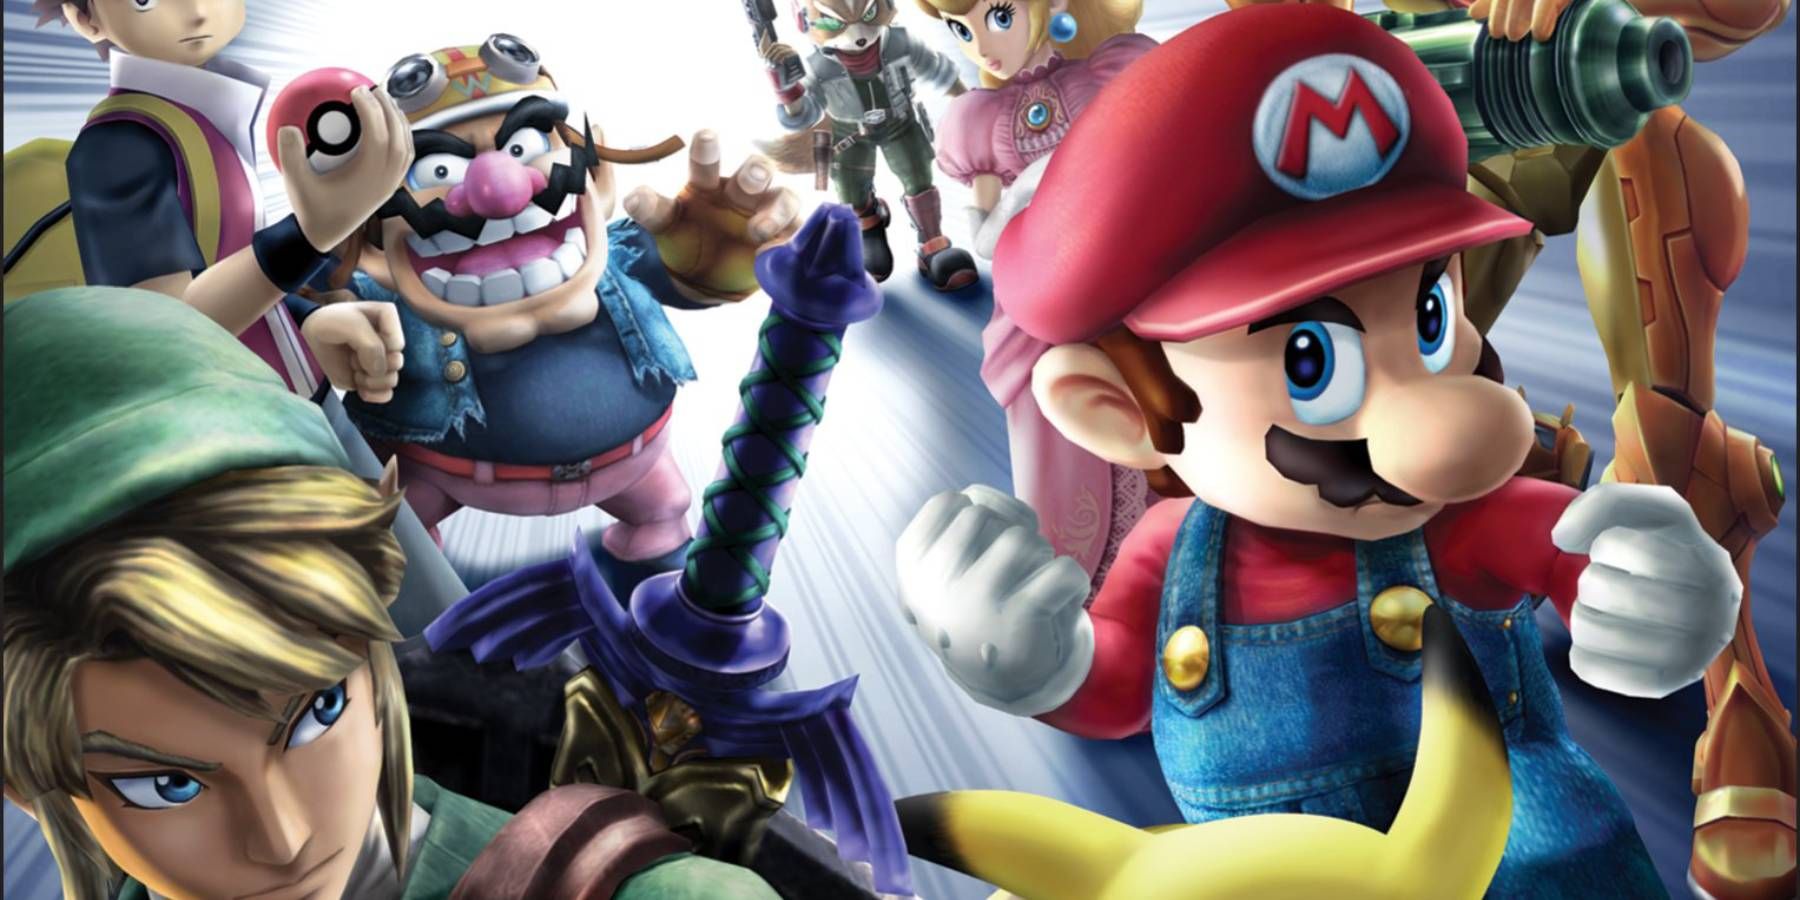 Portion of the cover art from Super Smash Bros. Brawl